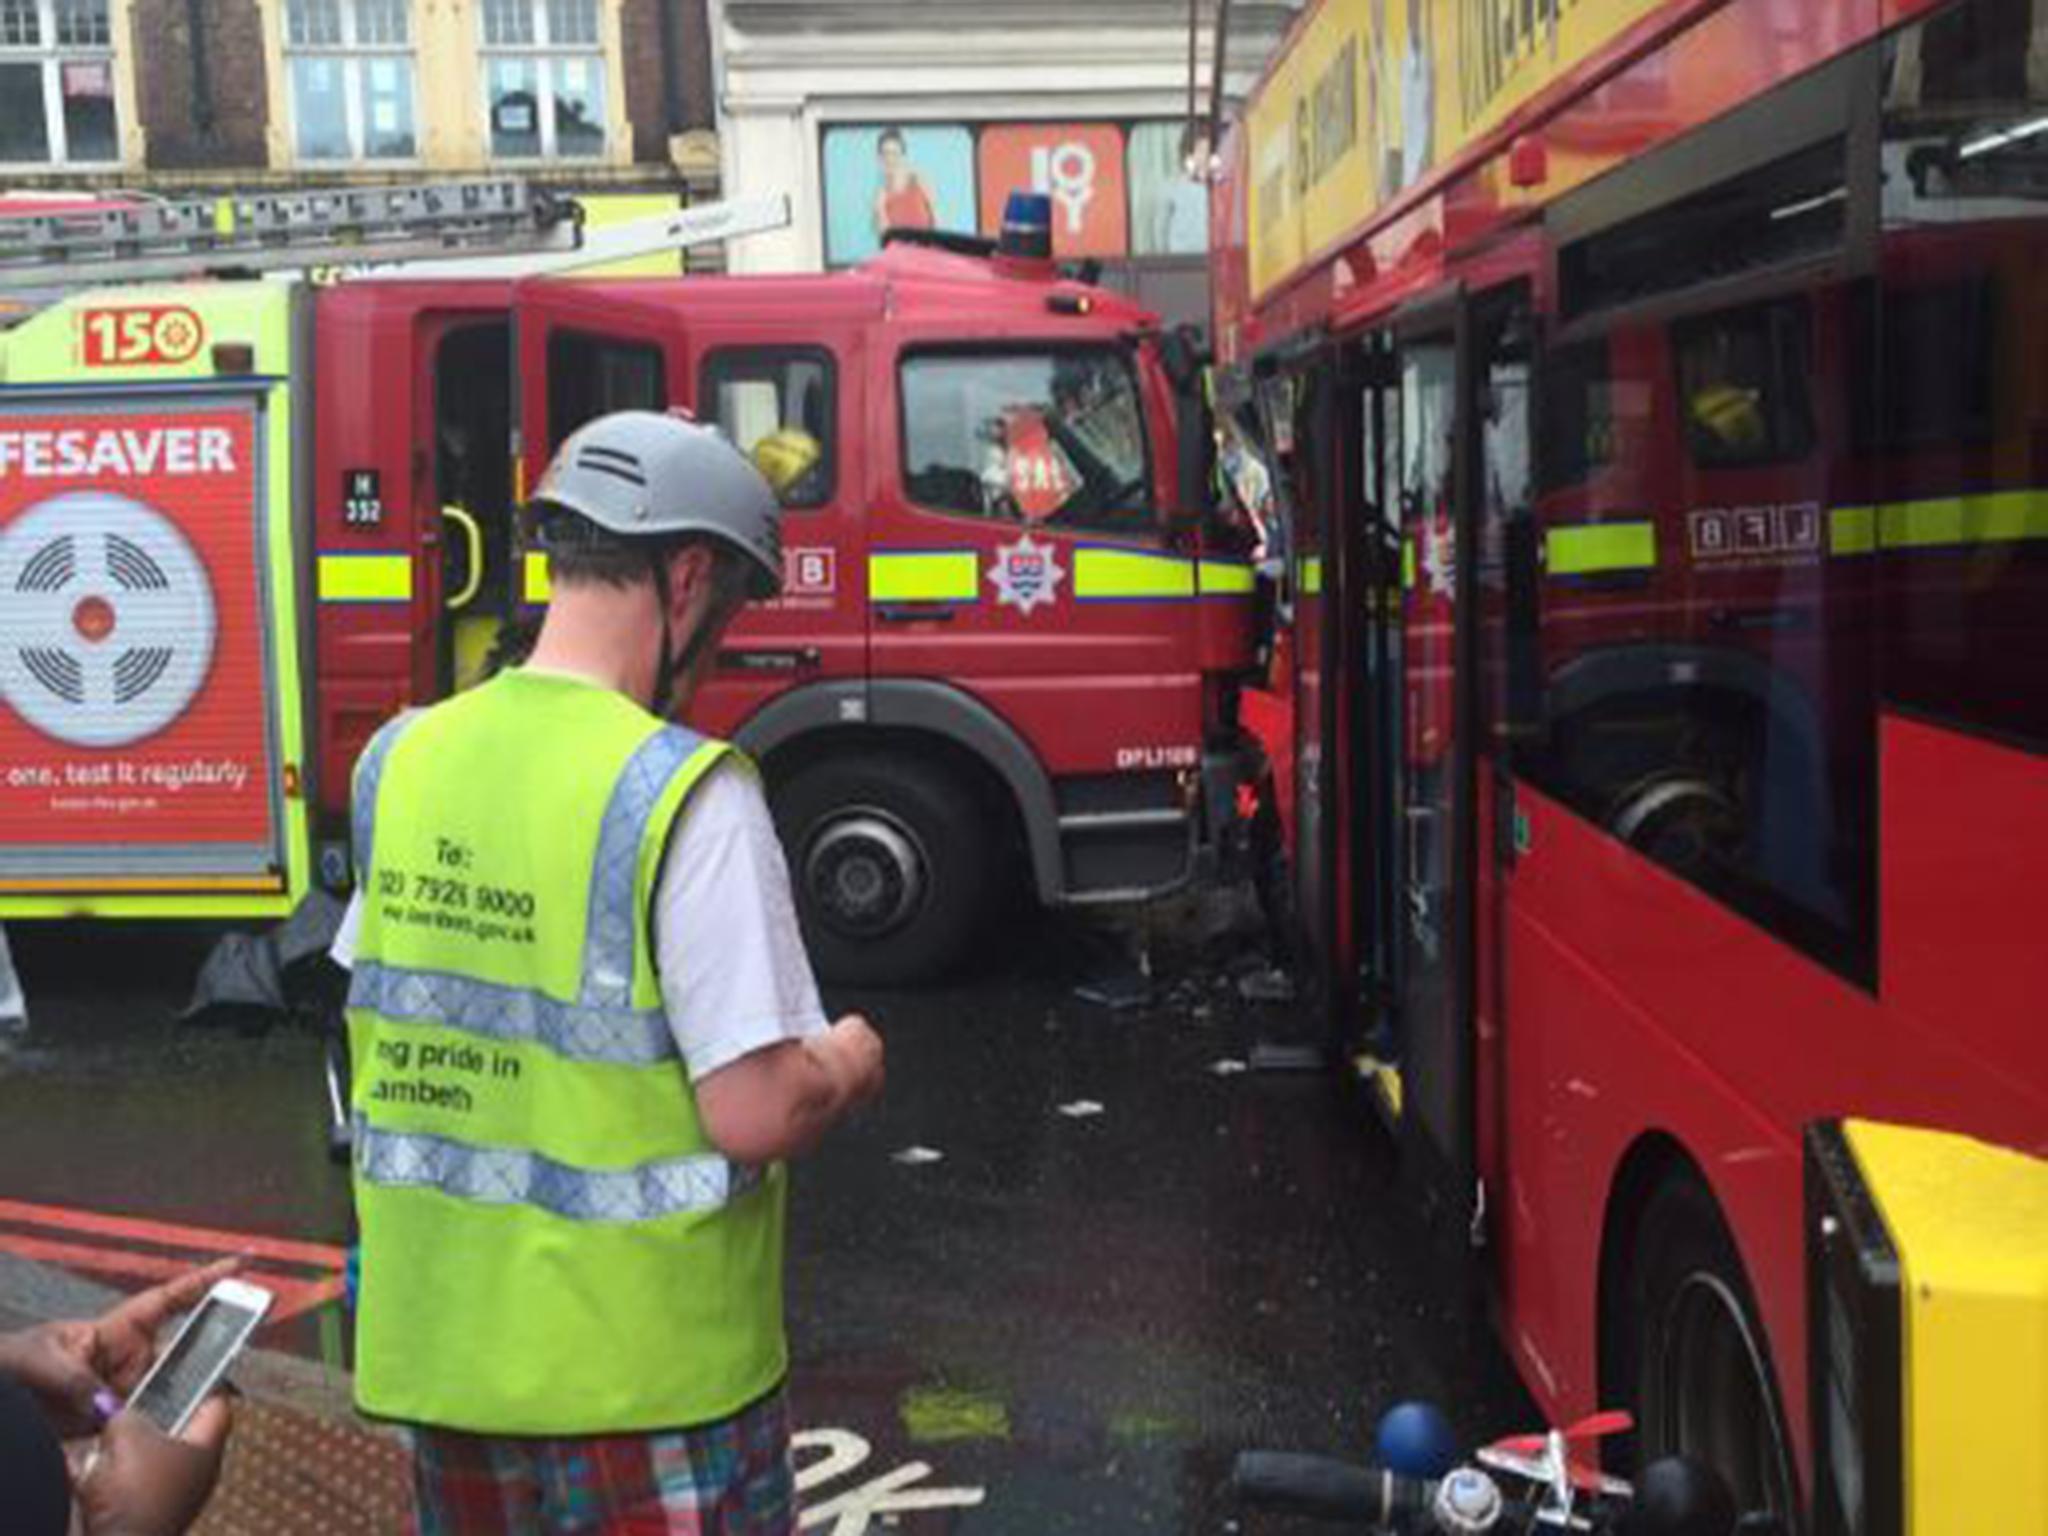 The three vehicles collided during rush hour in south London